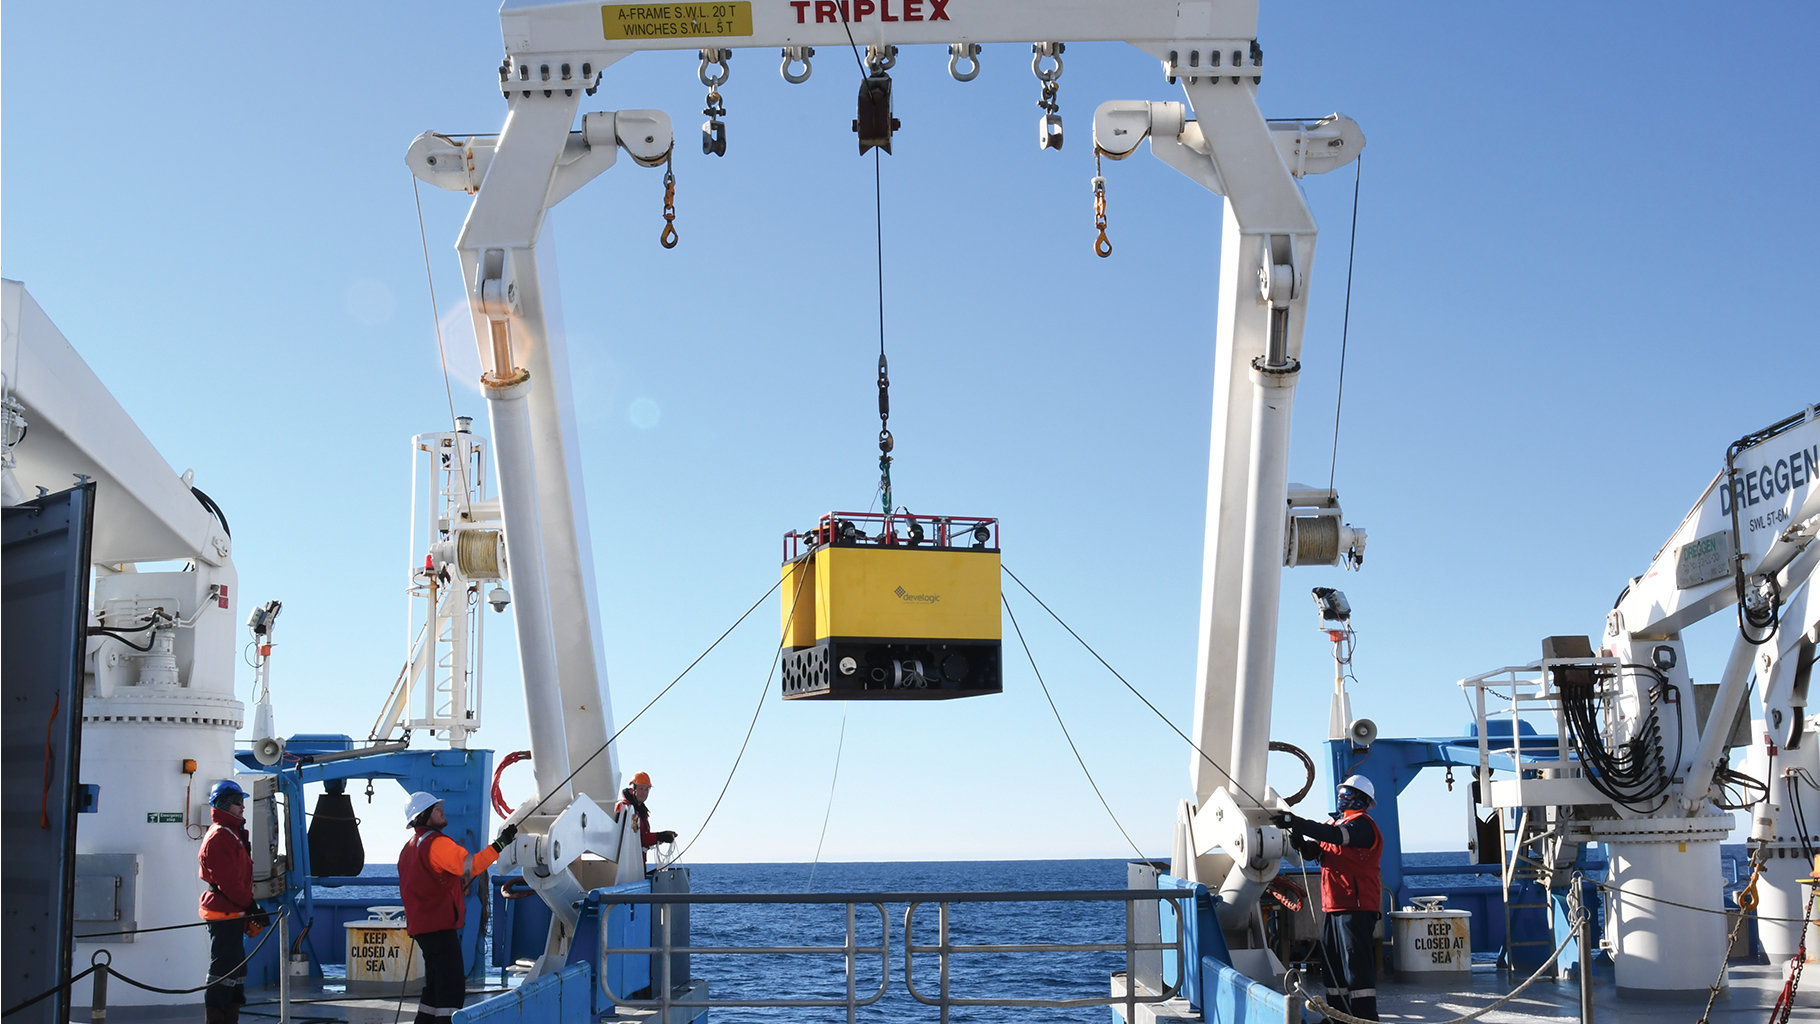 A device known as a KOMBI, here being lowered into the water, will sit on the seafloor for a year measuring changes in krill presence using deep-sea cameras and echosounders.